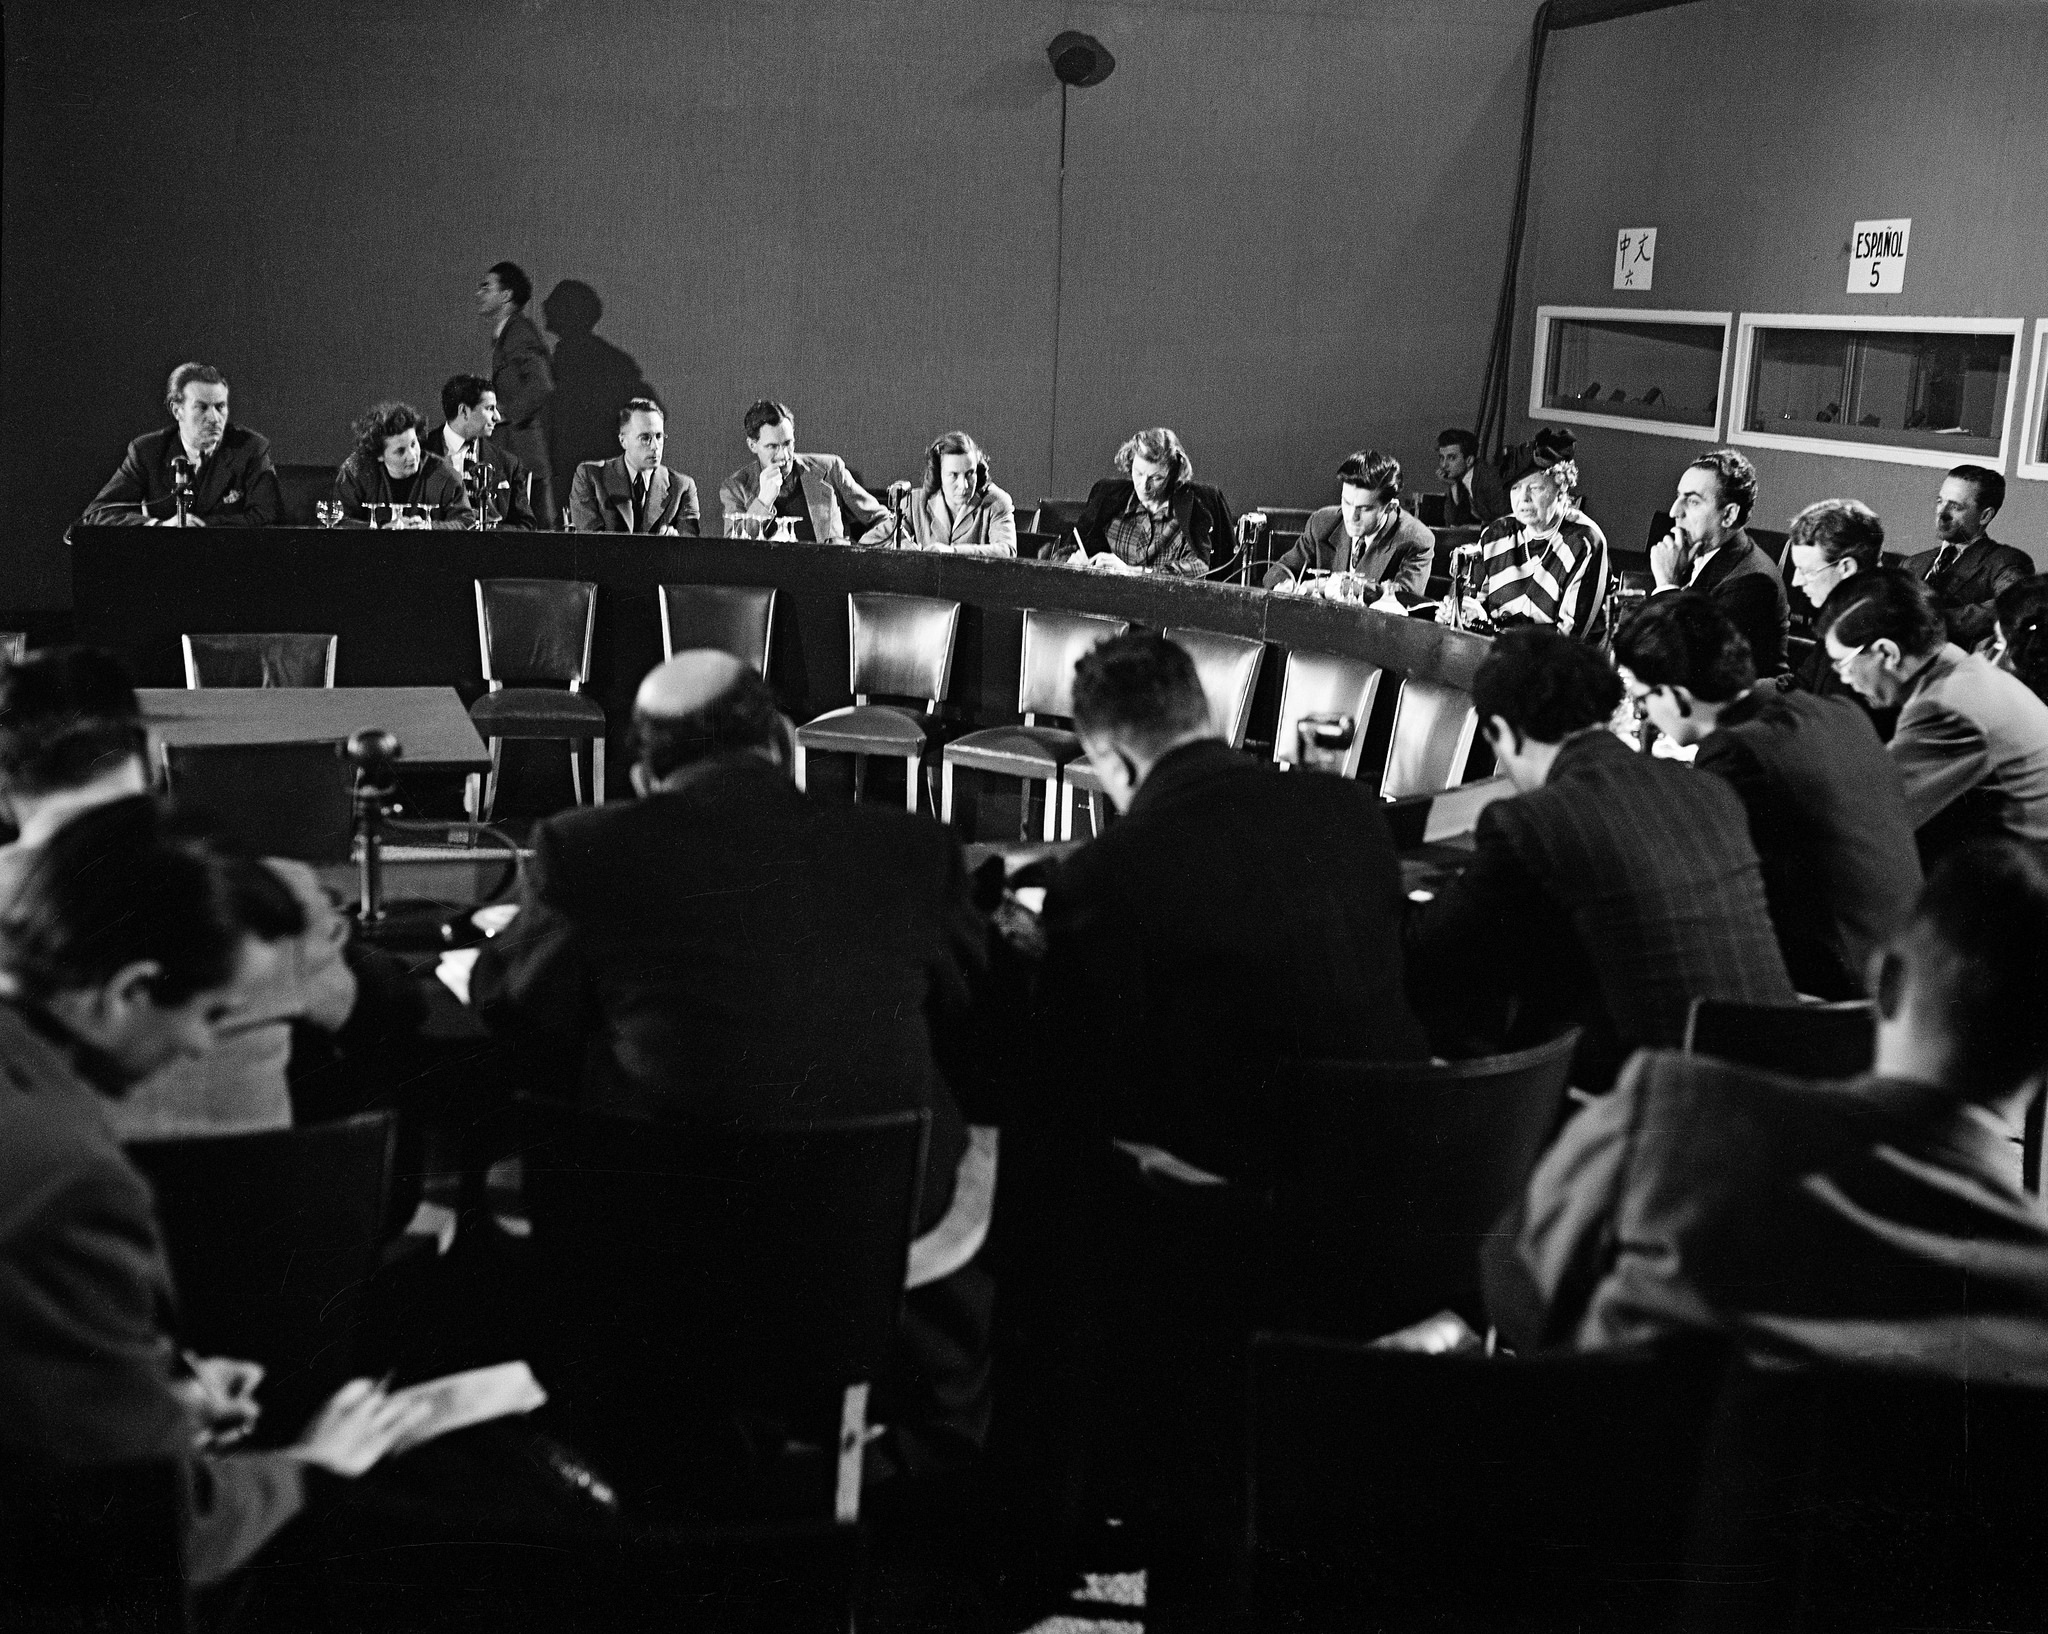 Eleanor Roosevelt, chairman of the Human Rights Commission, and Charles Malik, chairman of the General Assembly’s Third Committee (second from right), speak at a press conference after the completion of the Declaration of Human Rights in 1948. The Declaration turns 70 this month. (United Nations Photo)